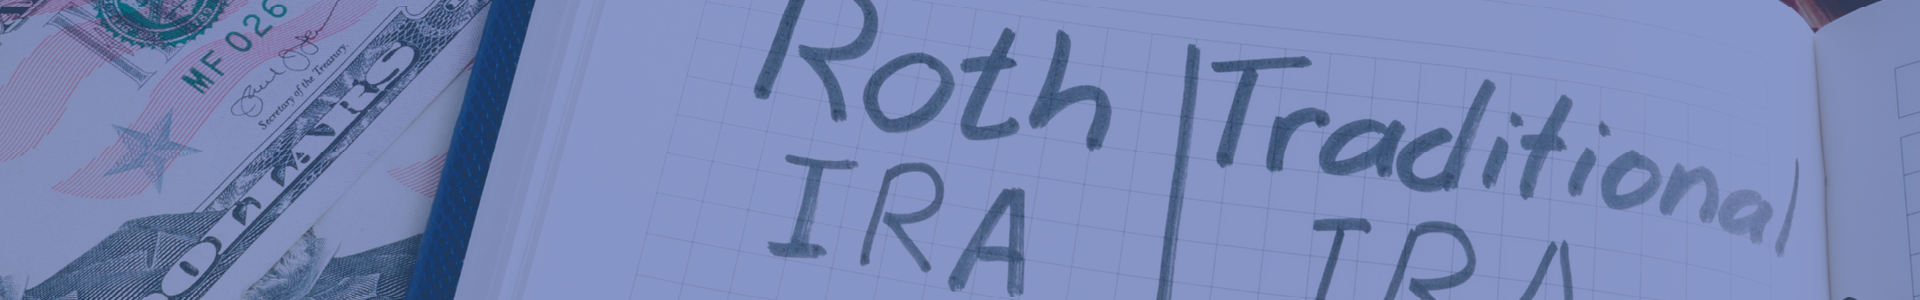 BOOK WITH ROTH IRA AND TRADITIONAL IRA